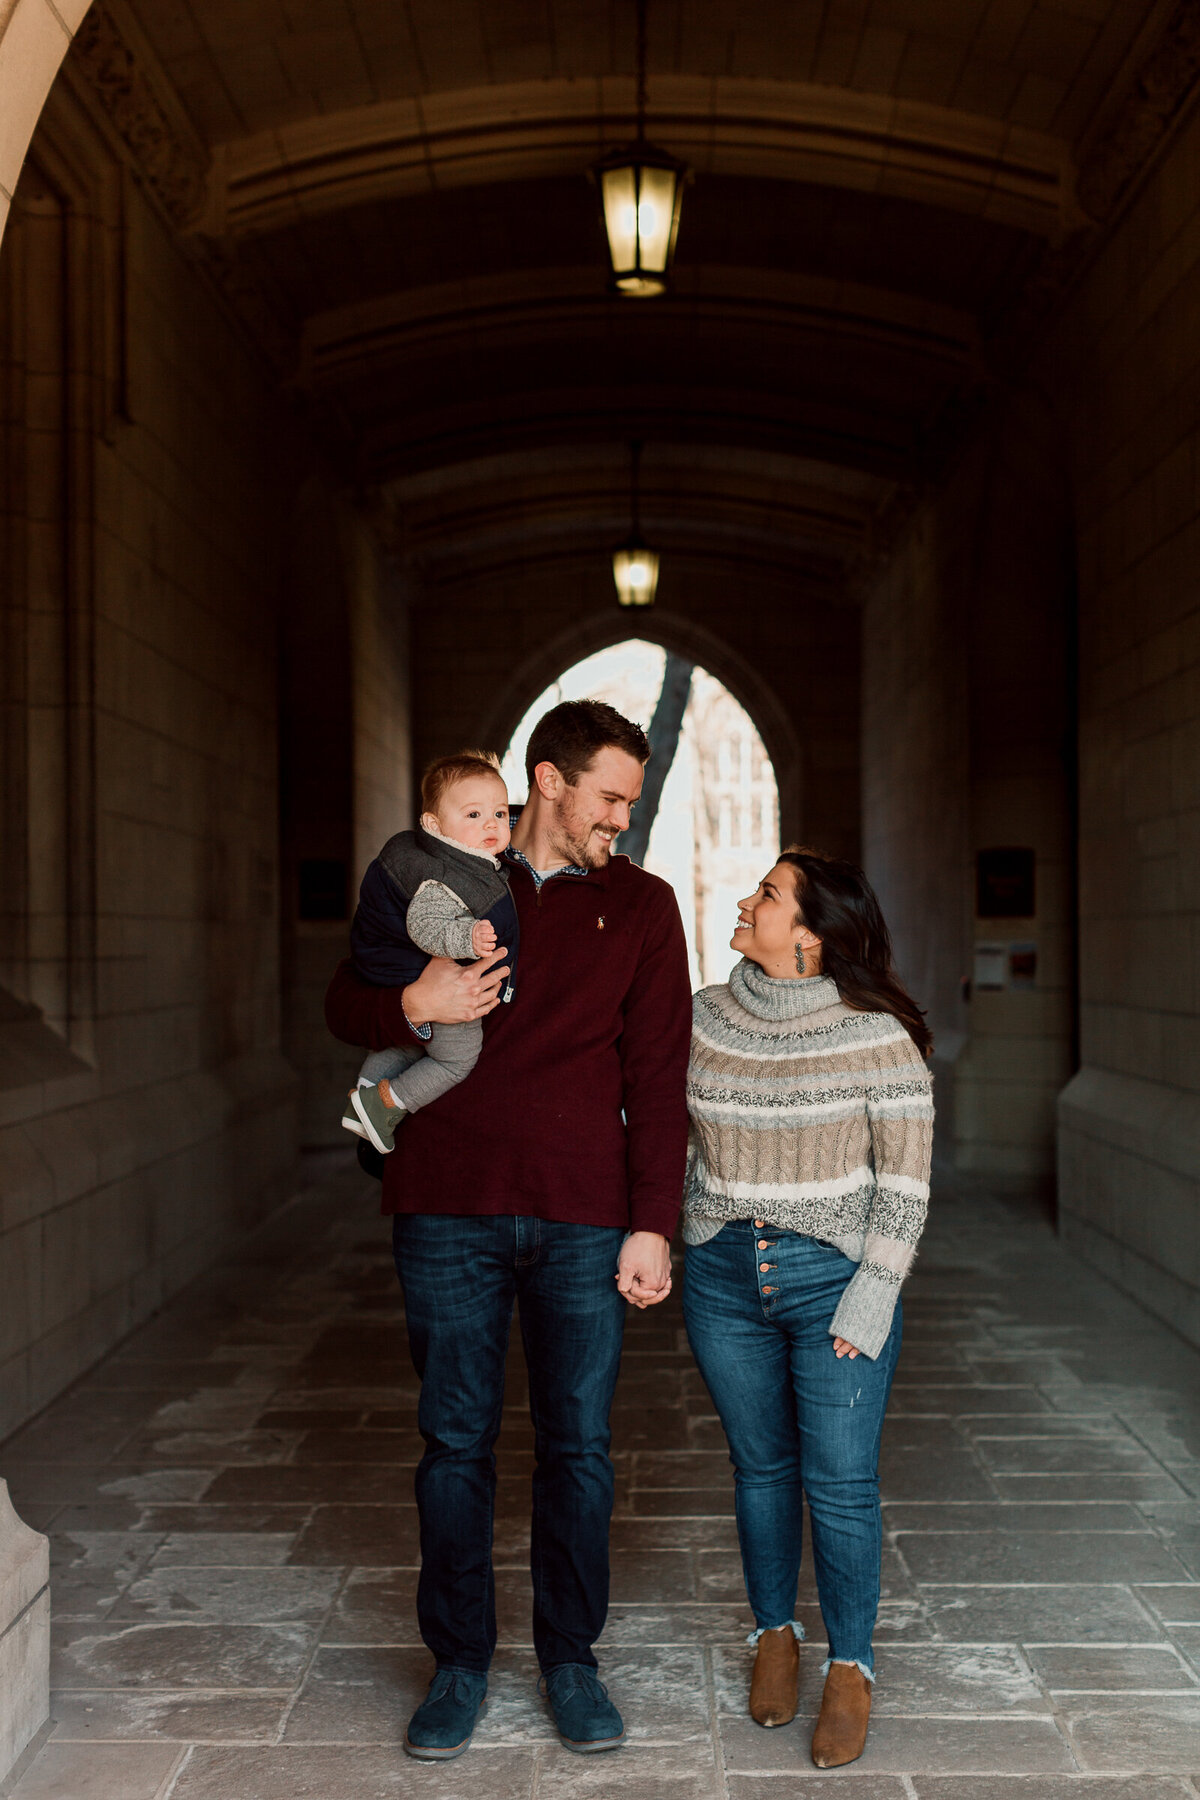 Cristao-Family-Session-University-of-Chicago-43